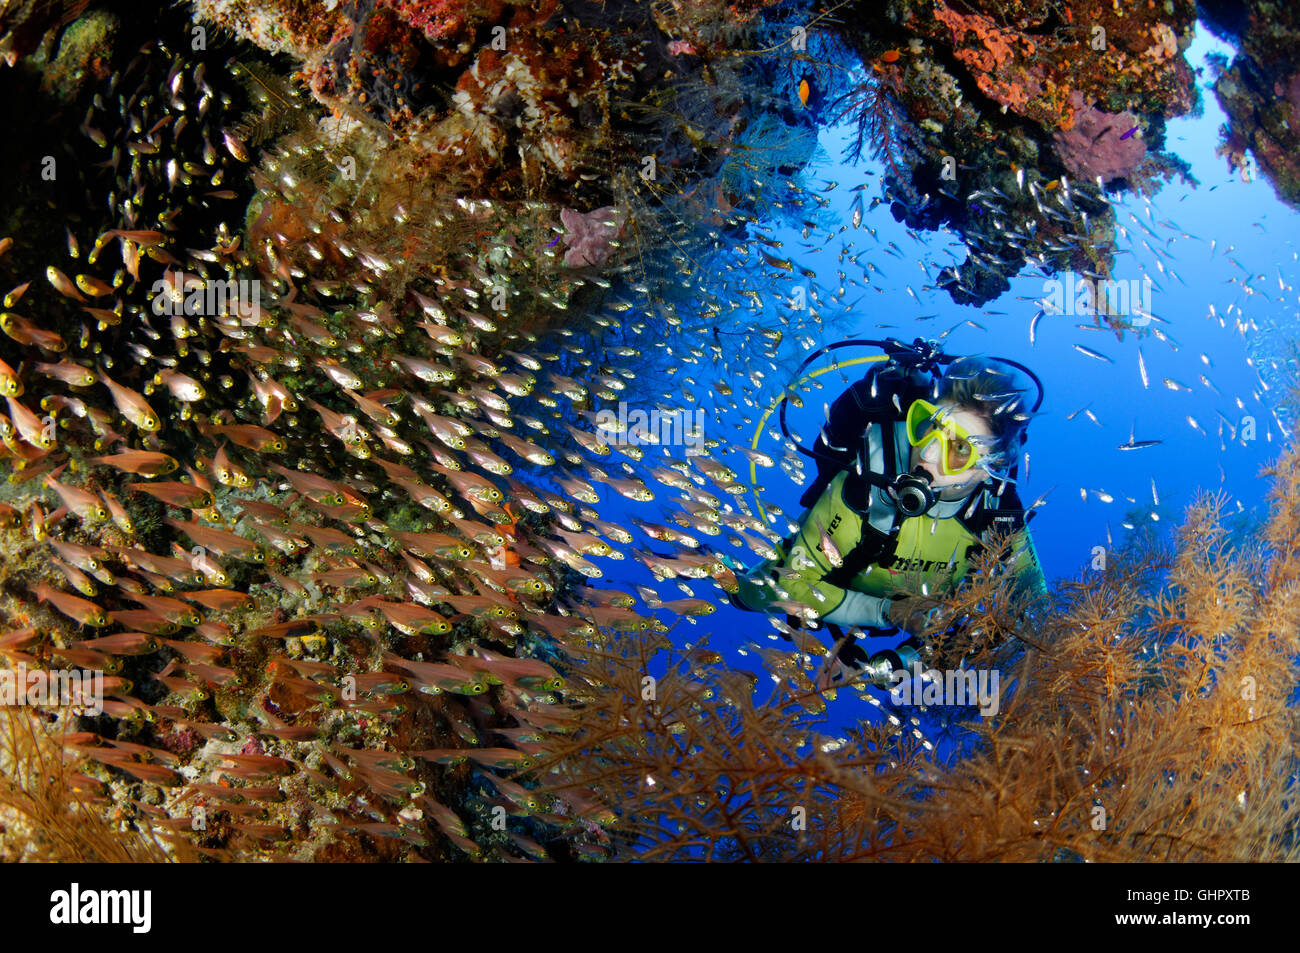 Parapriacanthus ransonneti, Shoal of Pigmy Sweeper and scuba diver, Abu Fandera, Red Sea, Egypt, Africa Stock Photo